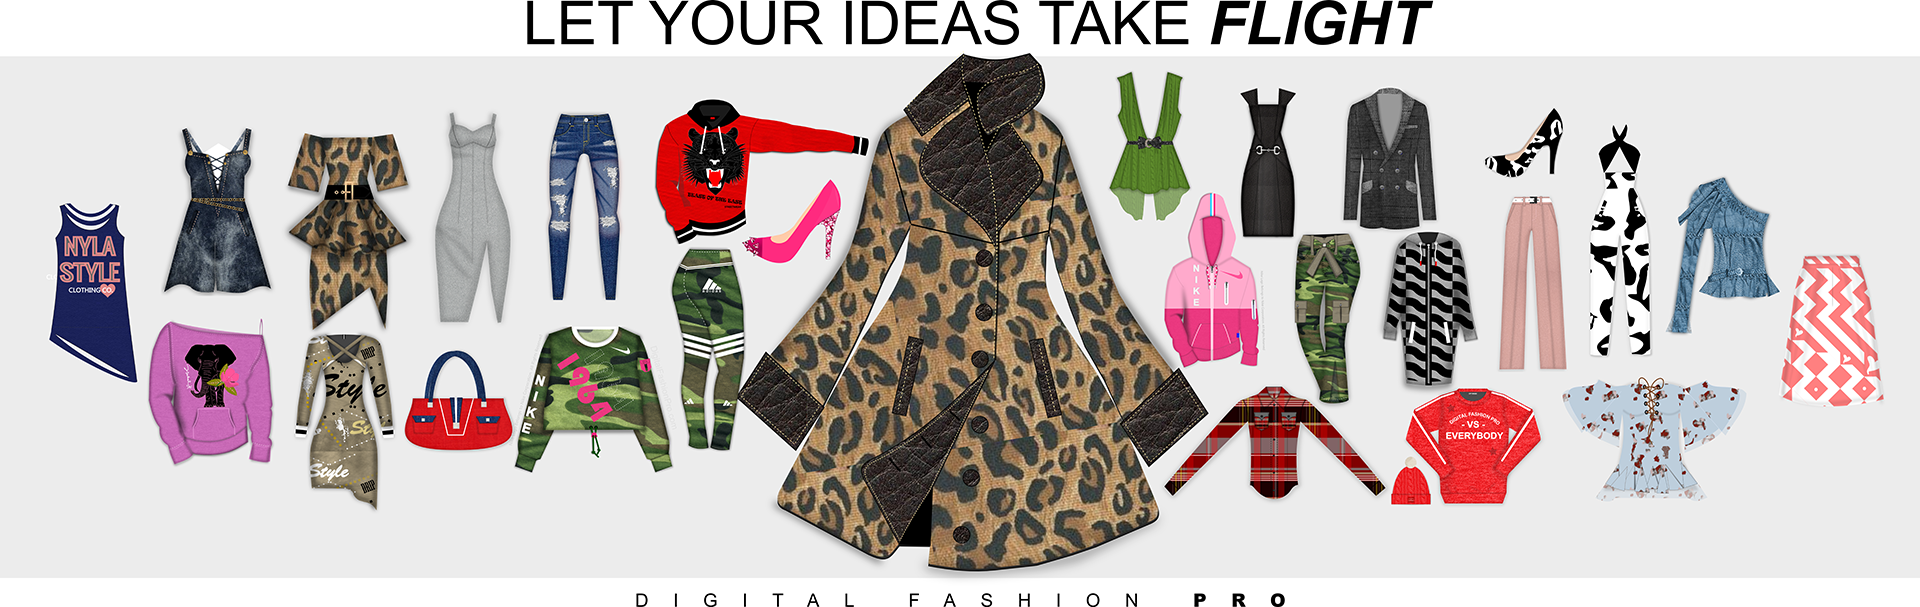 Let your ideas take flight - design your clothing with digital fashion pro fashion design software - VX